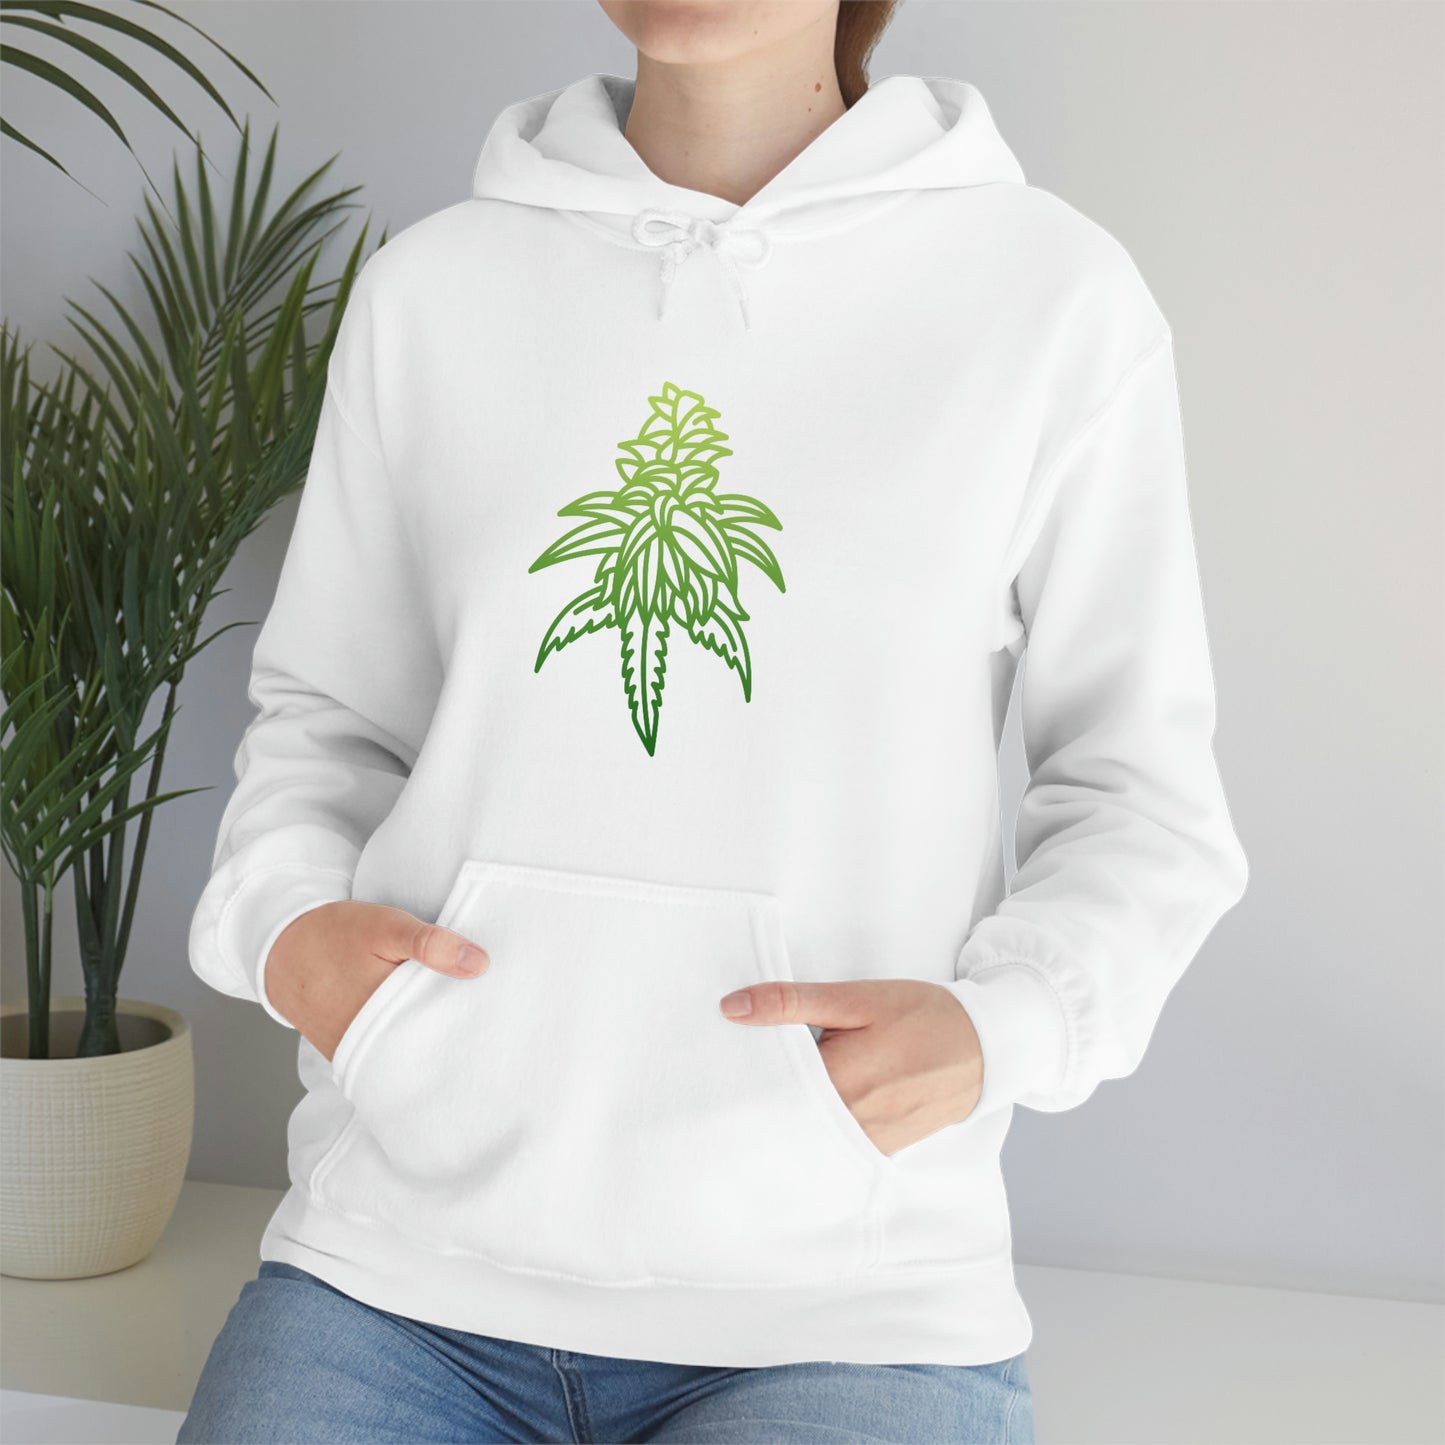 a woman wearing a white Sour Diesel Marijuana Hoodie with a green cannabis leaf on it.